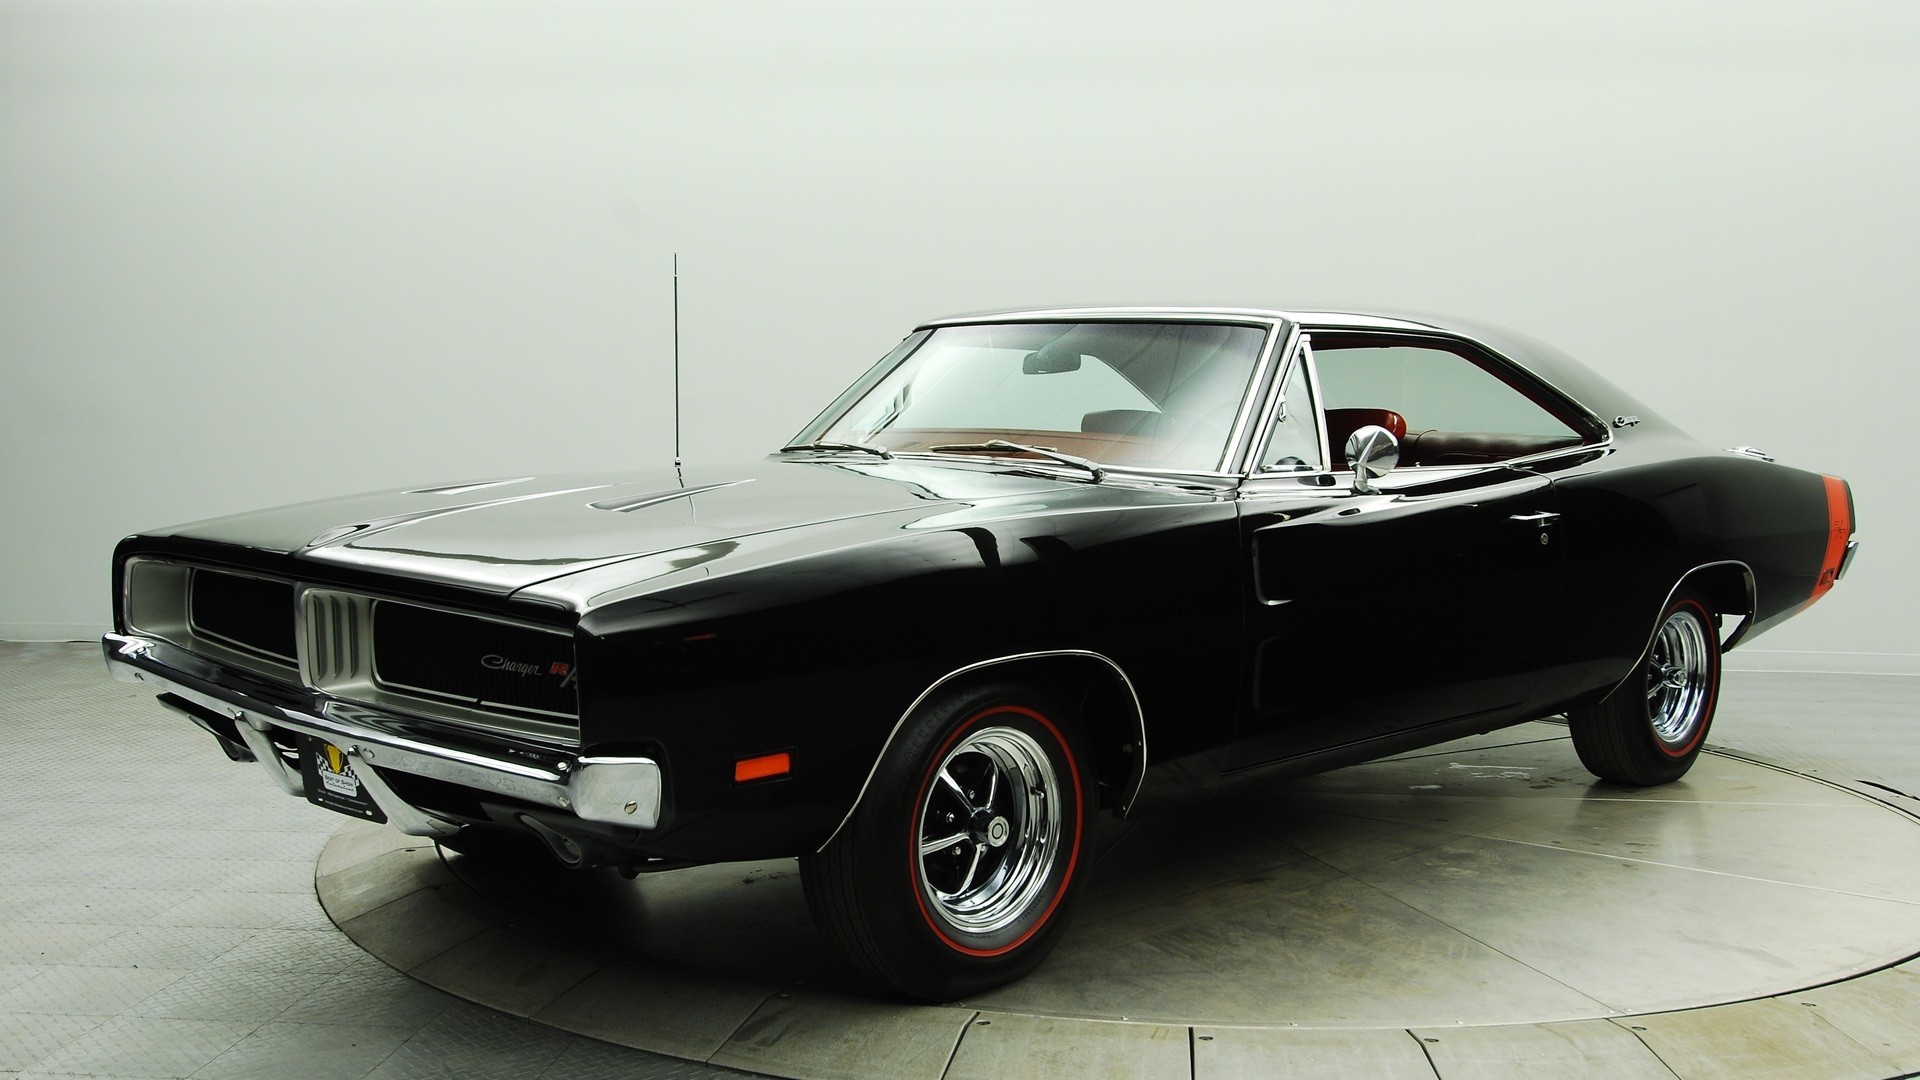 1920x1080 69 Dodge Charger Wallpaper